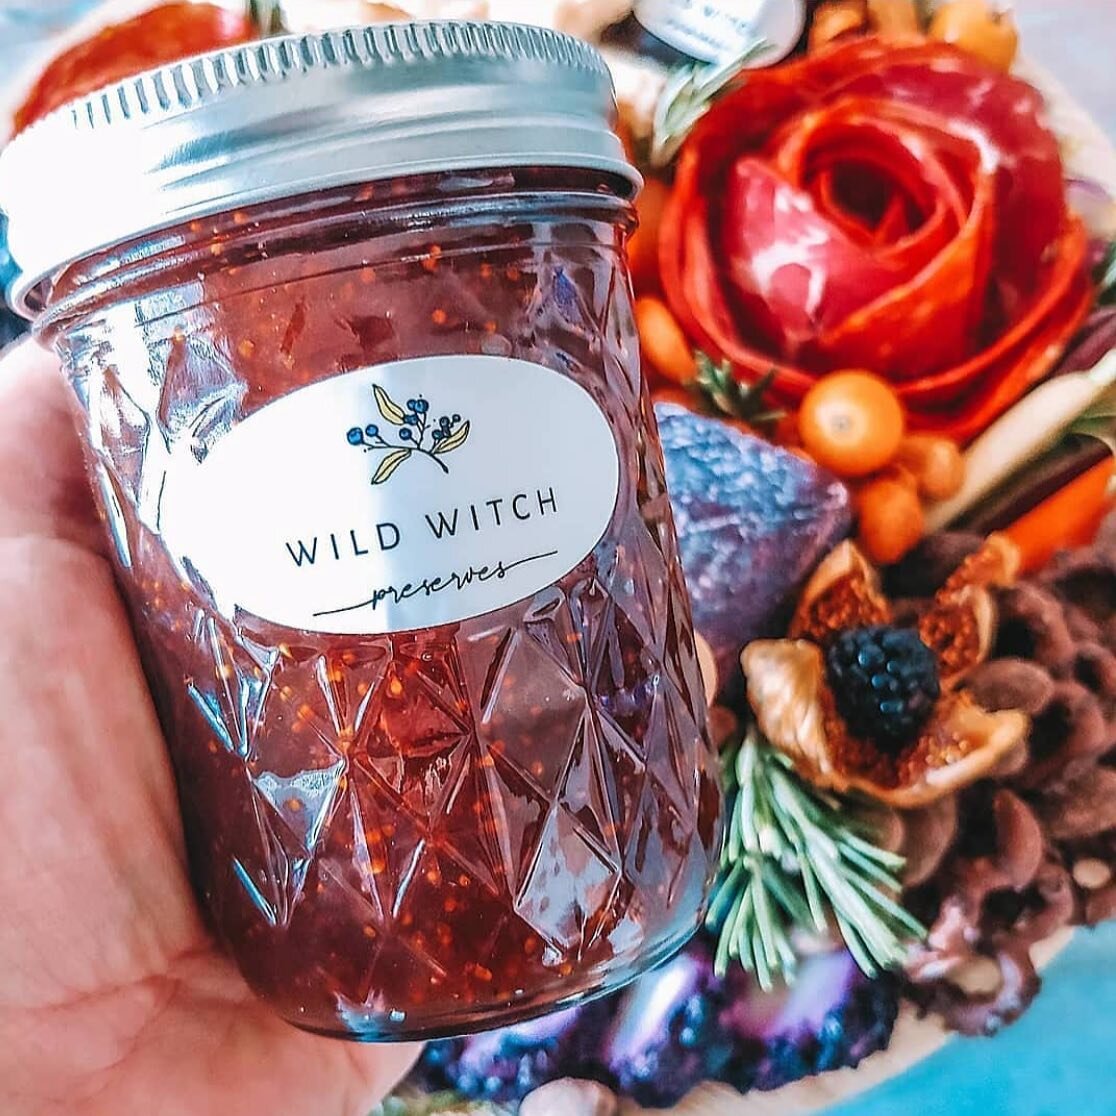 It&rsquo;s finally MARCH! @boardsbycourtney and I both share a March birthday! So let's celebrate 🎉 Time for a giveaway 💖 You will win a small cheeseboard by the lovely Courtney (select dates/no weekends) and 8 oz jar of Figs and Red Wine preserves